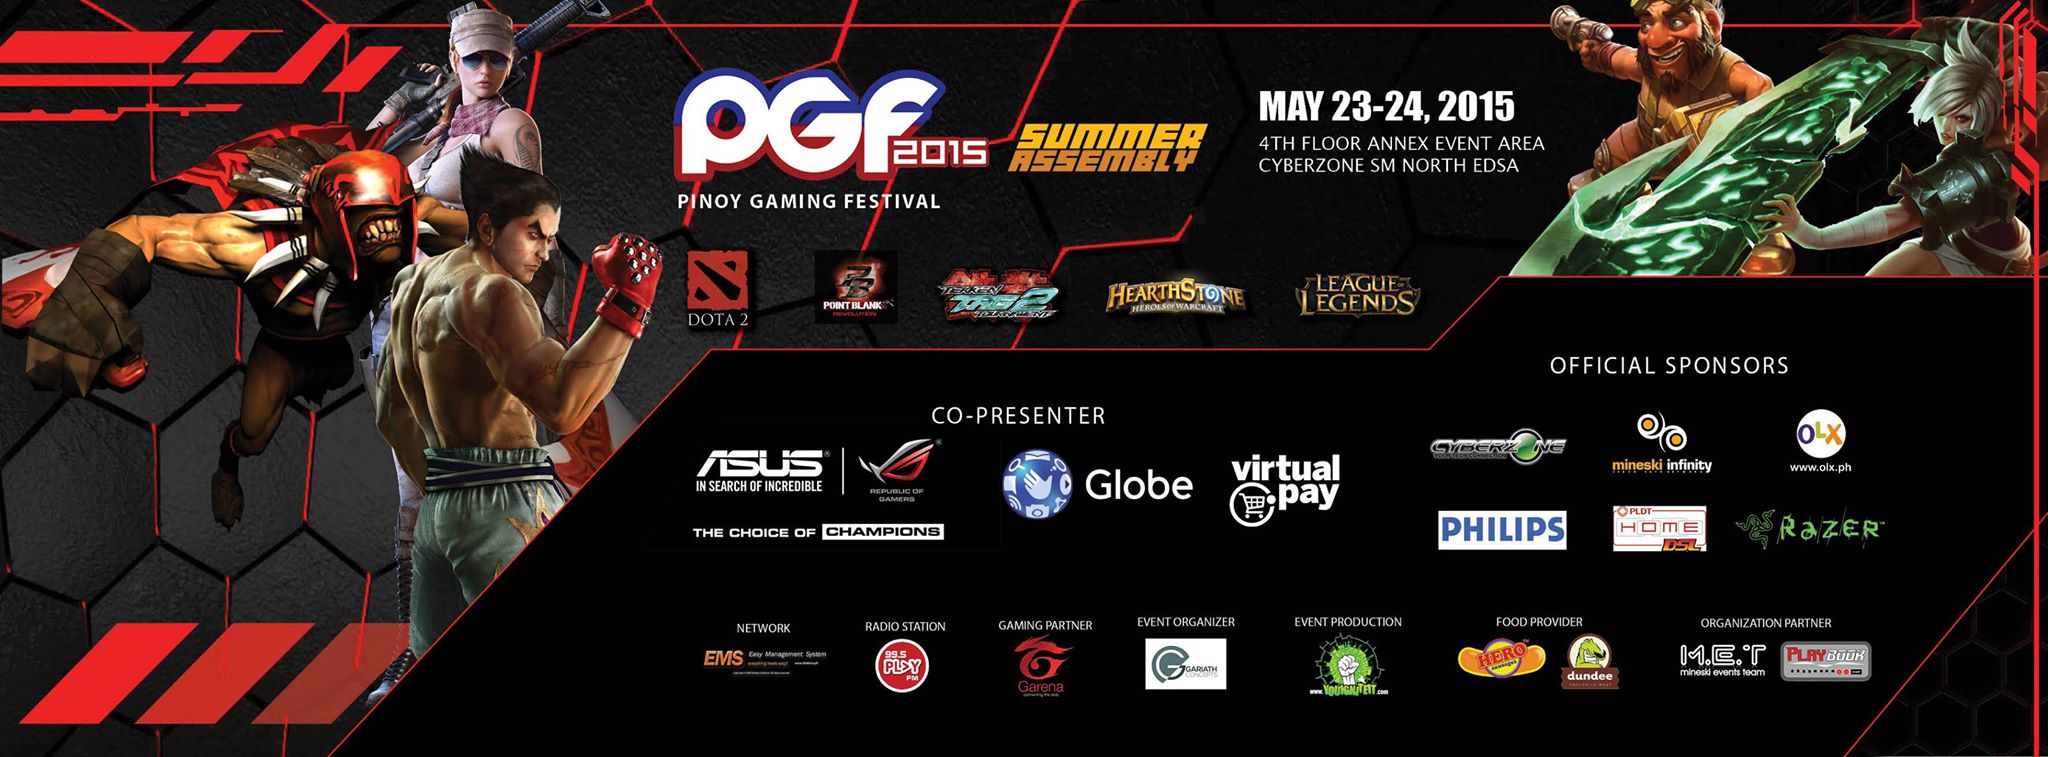 Pinoy Gaming Festival: Summer Assembly 2015 21